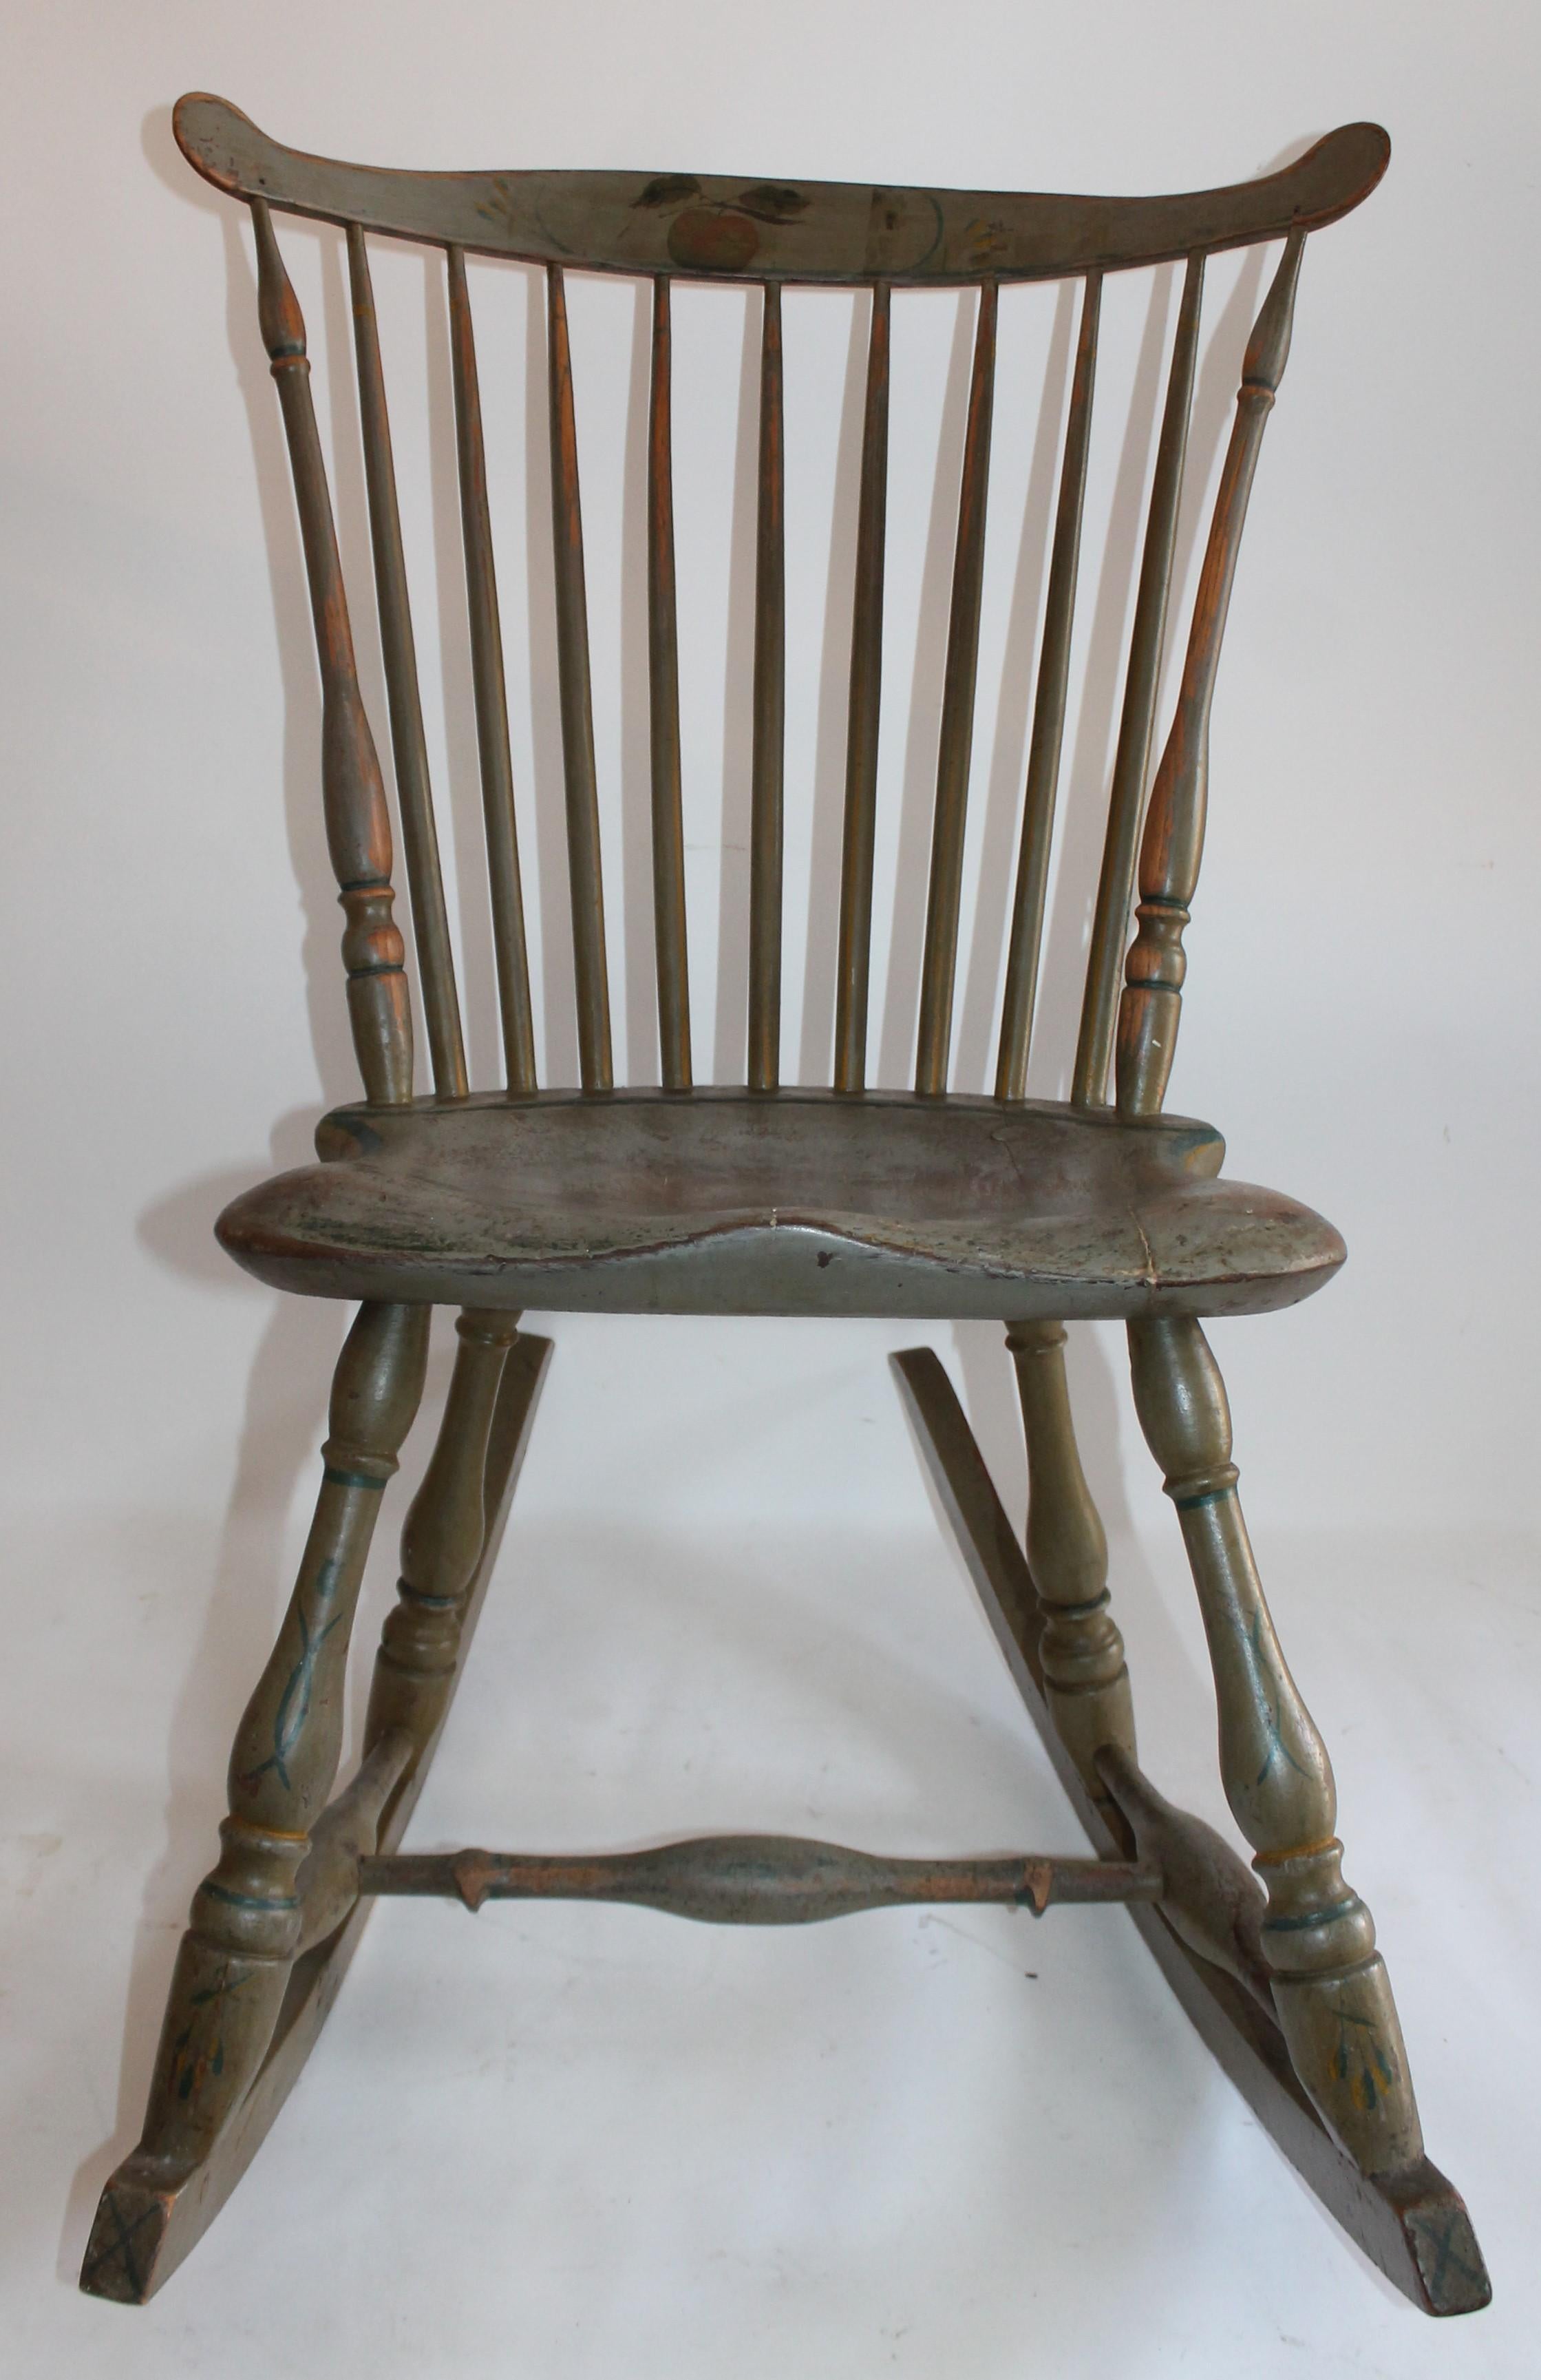 This paint decorated 19th century Pennsylvania Windsor rocking chair has great form and in good condition. The saddle seat and fiddle back has a great painted surface with an apple painted on the front. This was found in a house in Union County,